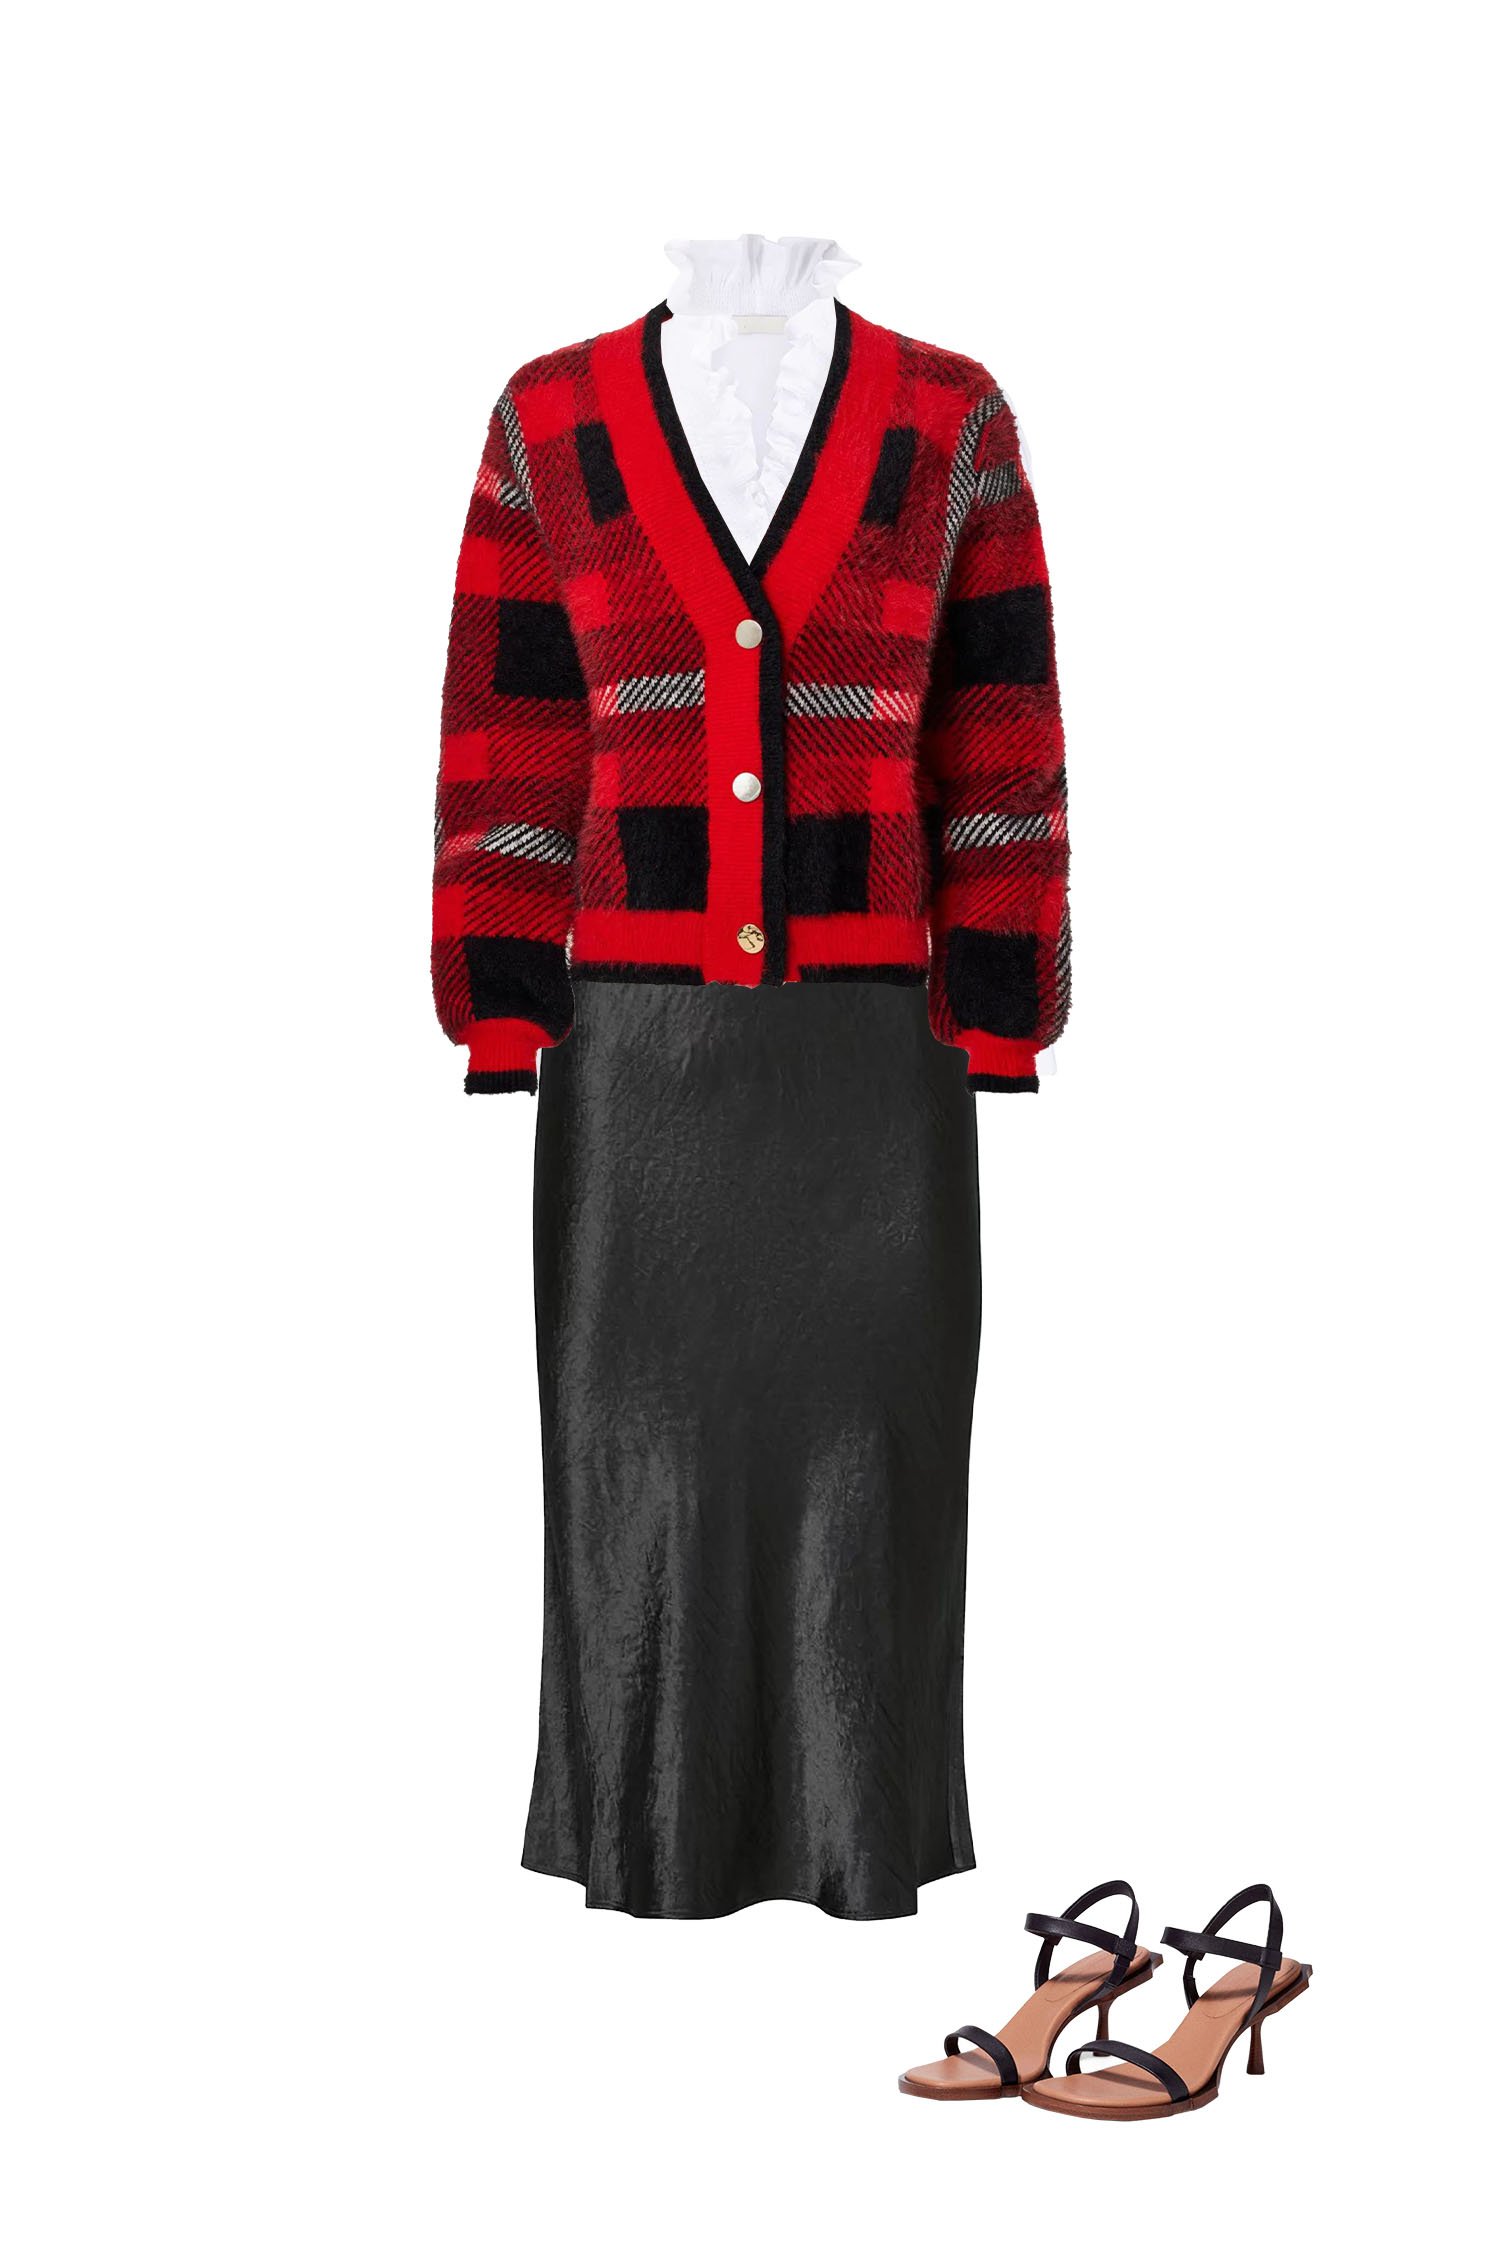 Black Satin Skirt Outfit with White Ruffle Neck Blouse, Black and Red Plaid Cardigan and Black Heeled Sandals